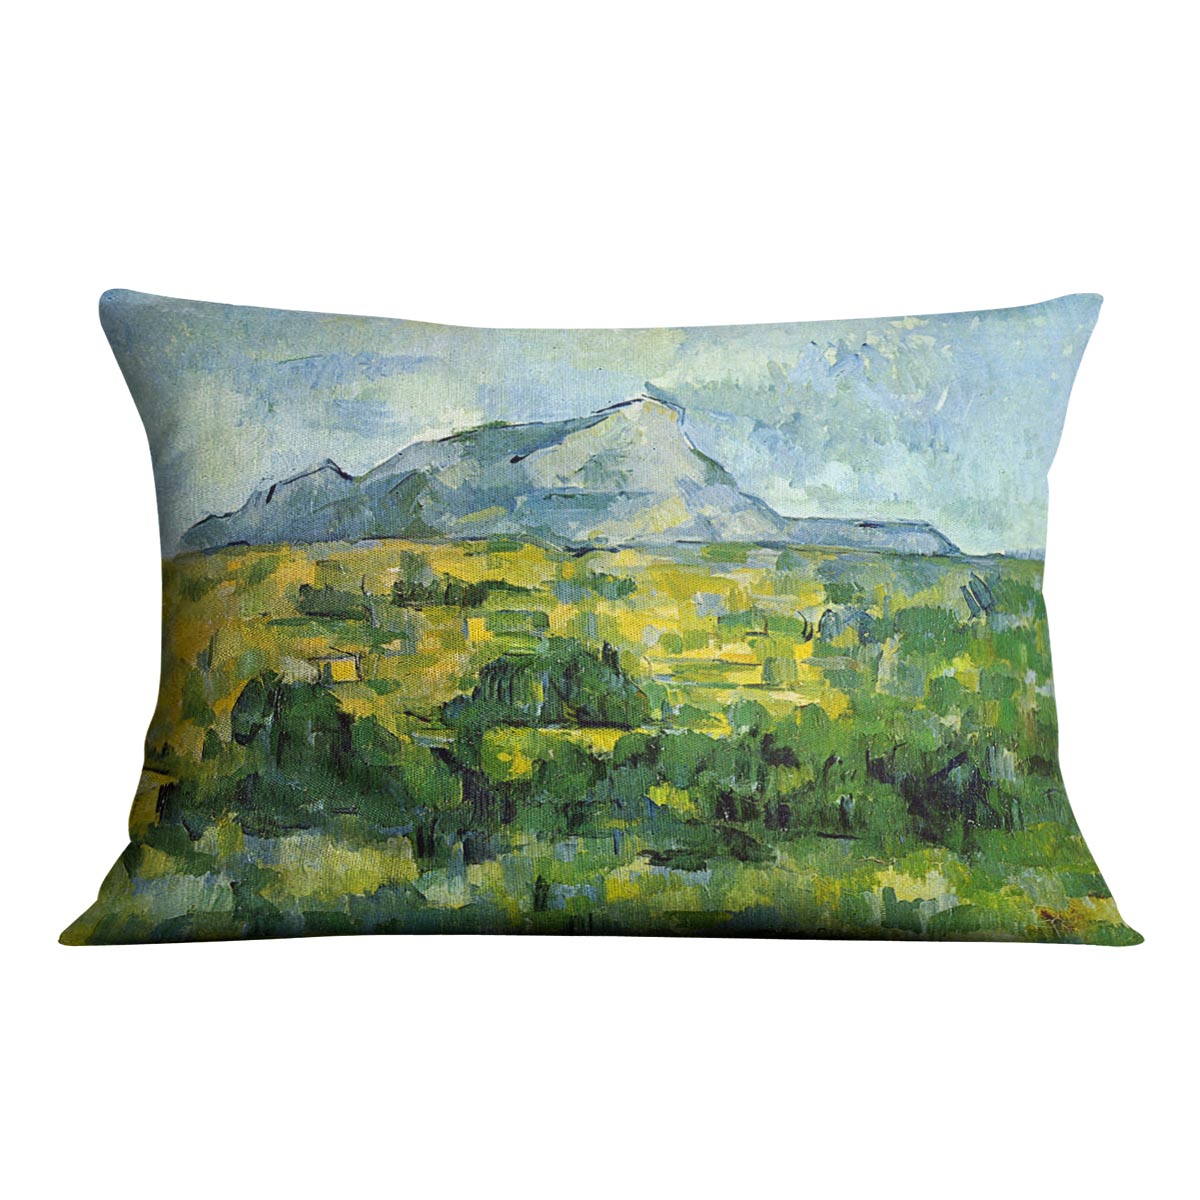 Mount St. Victiore by Cezanne Cushion